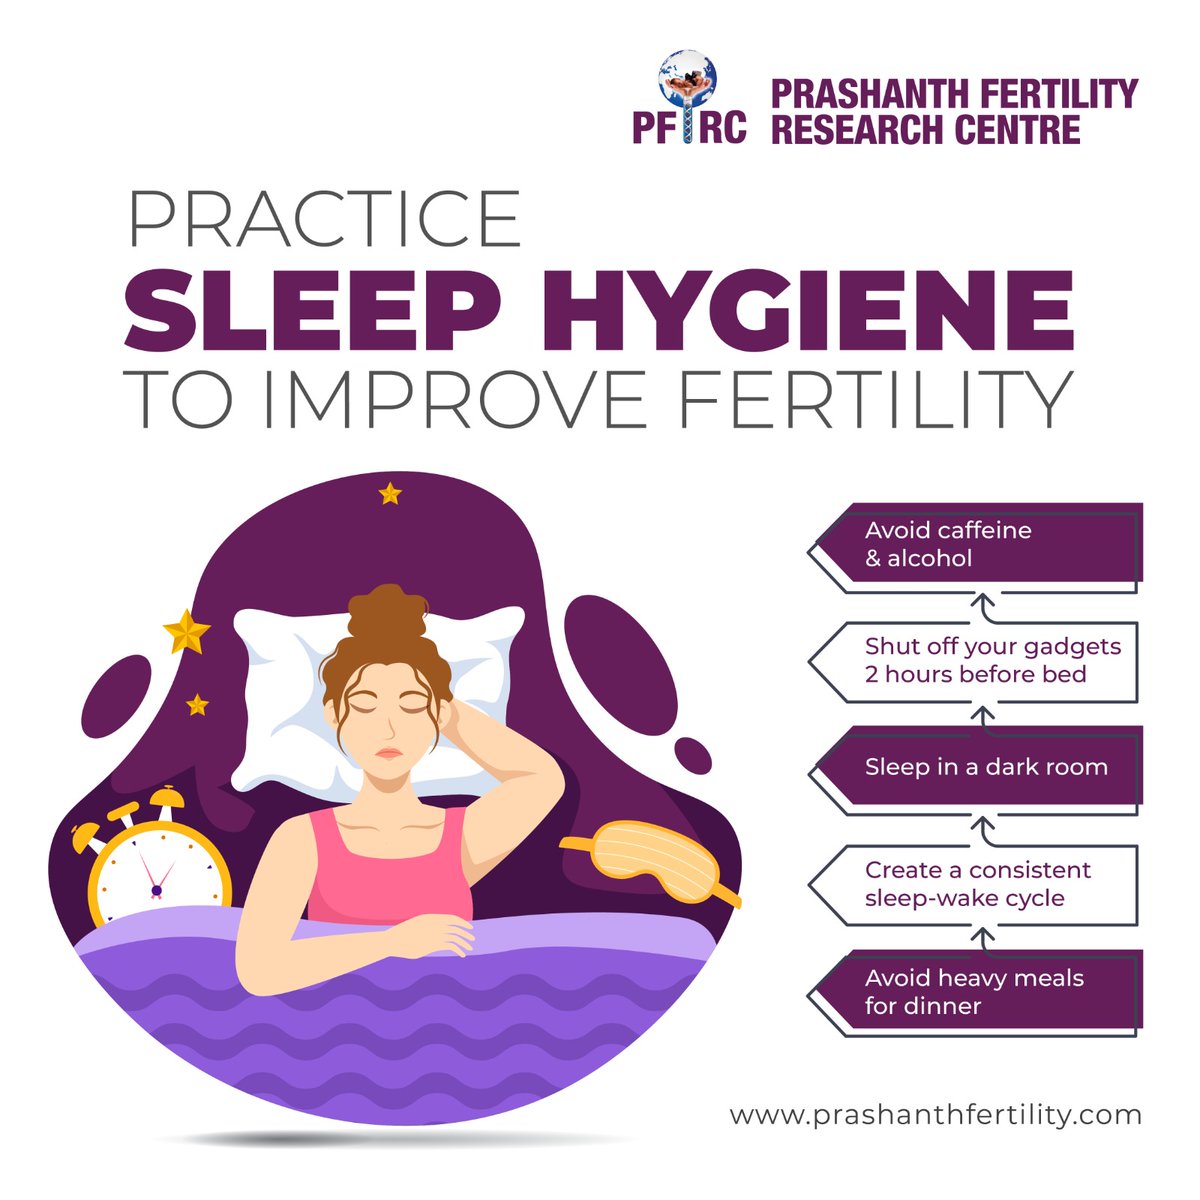 Maintaining good sleep hygiene is crucial for overall health and can play a significant role in enhancing fertility  #prashanthfertility #SleepHygiene #HealthySleep #BetterSleep
#FertilityAndSleep #SleepForHealth #QualitySleep #SleepTips #HealthyLifestyle zurl.co/yrqp